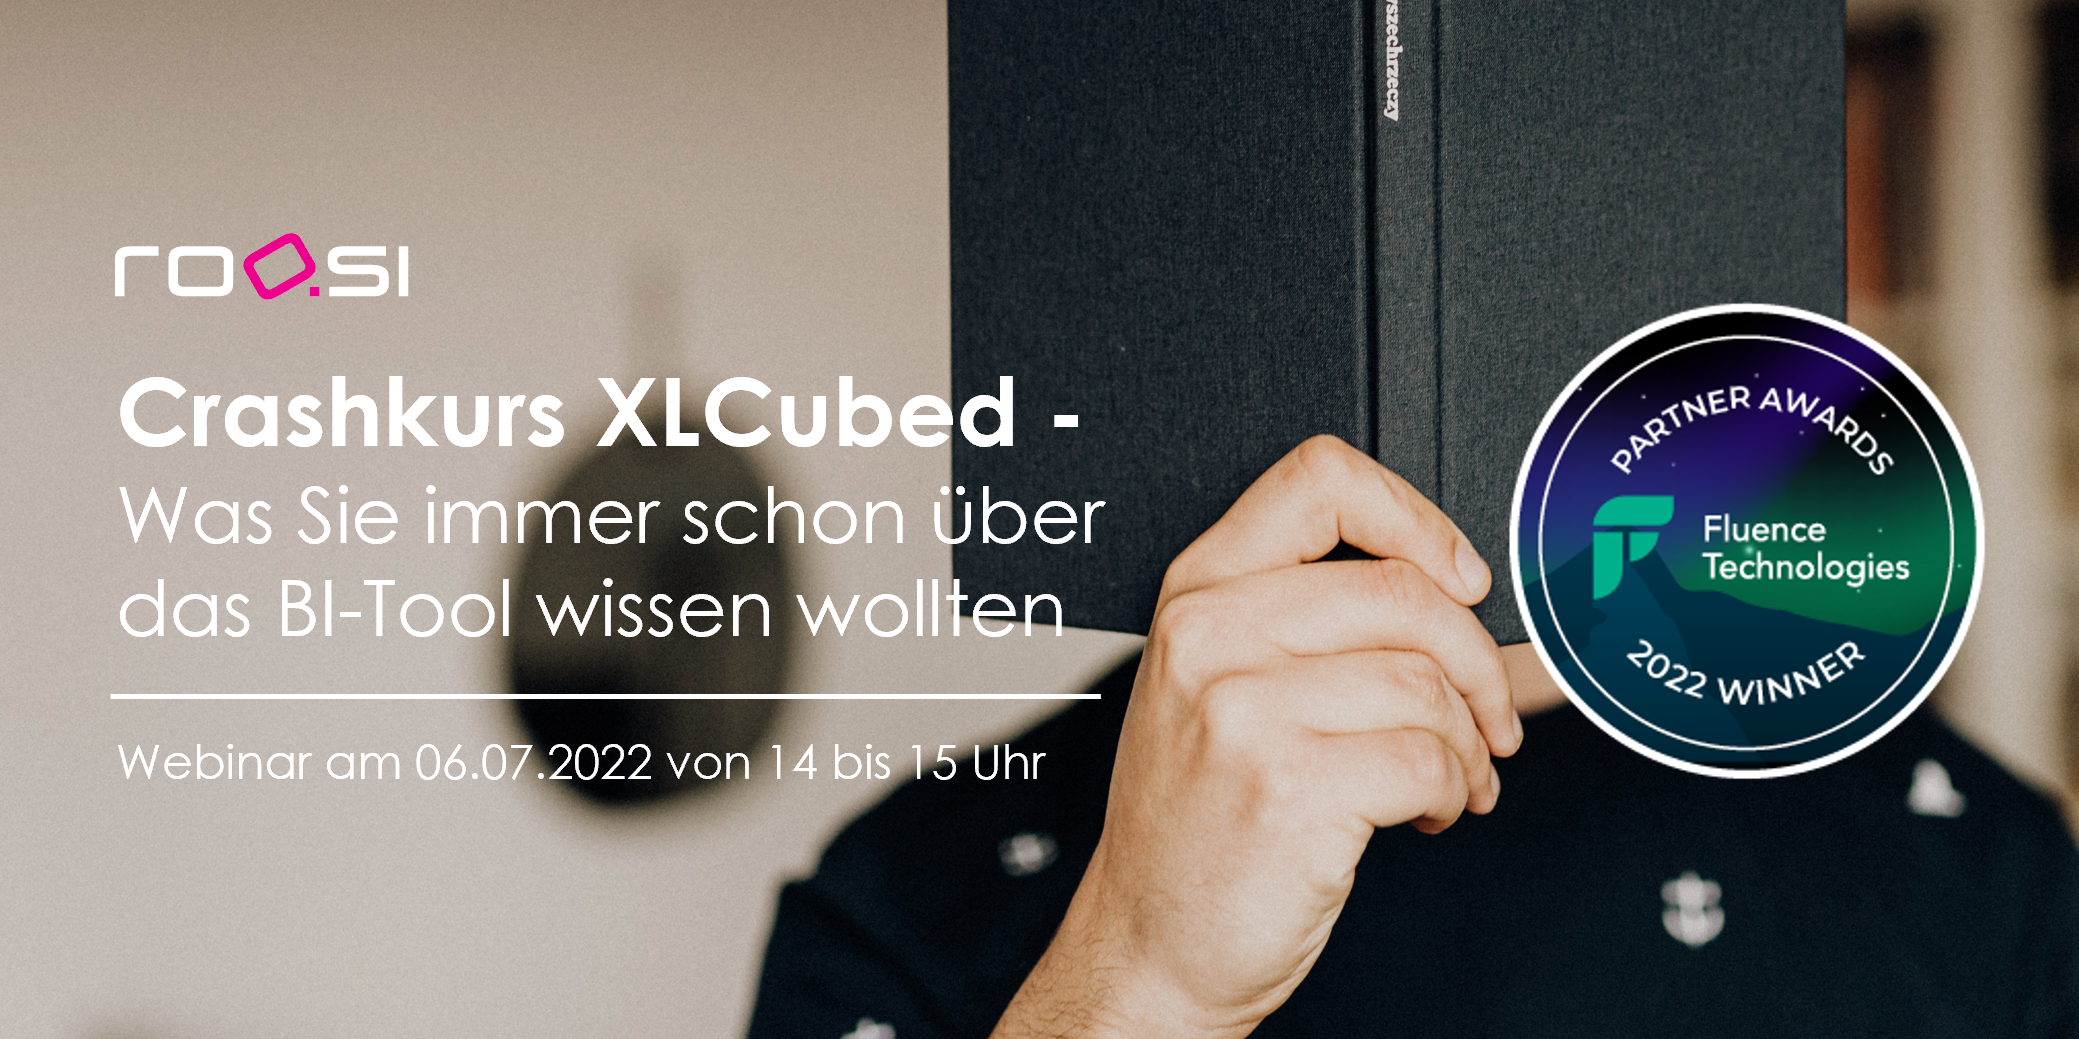 roosi ist XLCubed Partner of the Year!